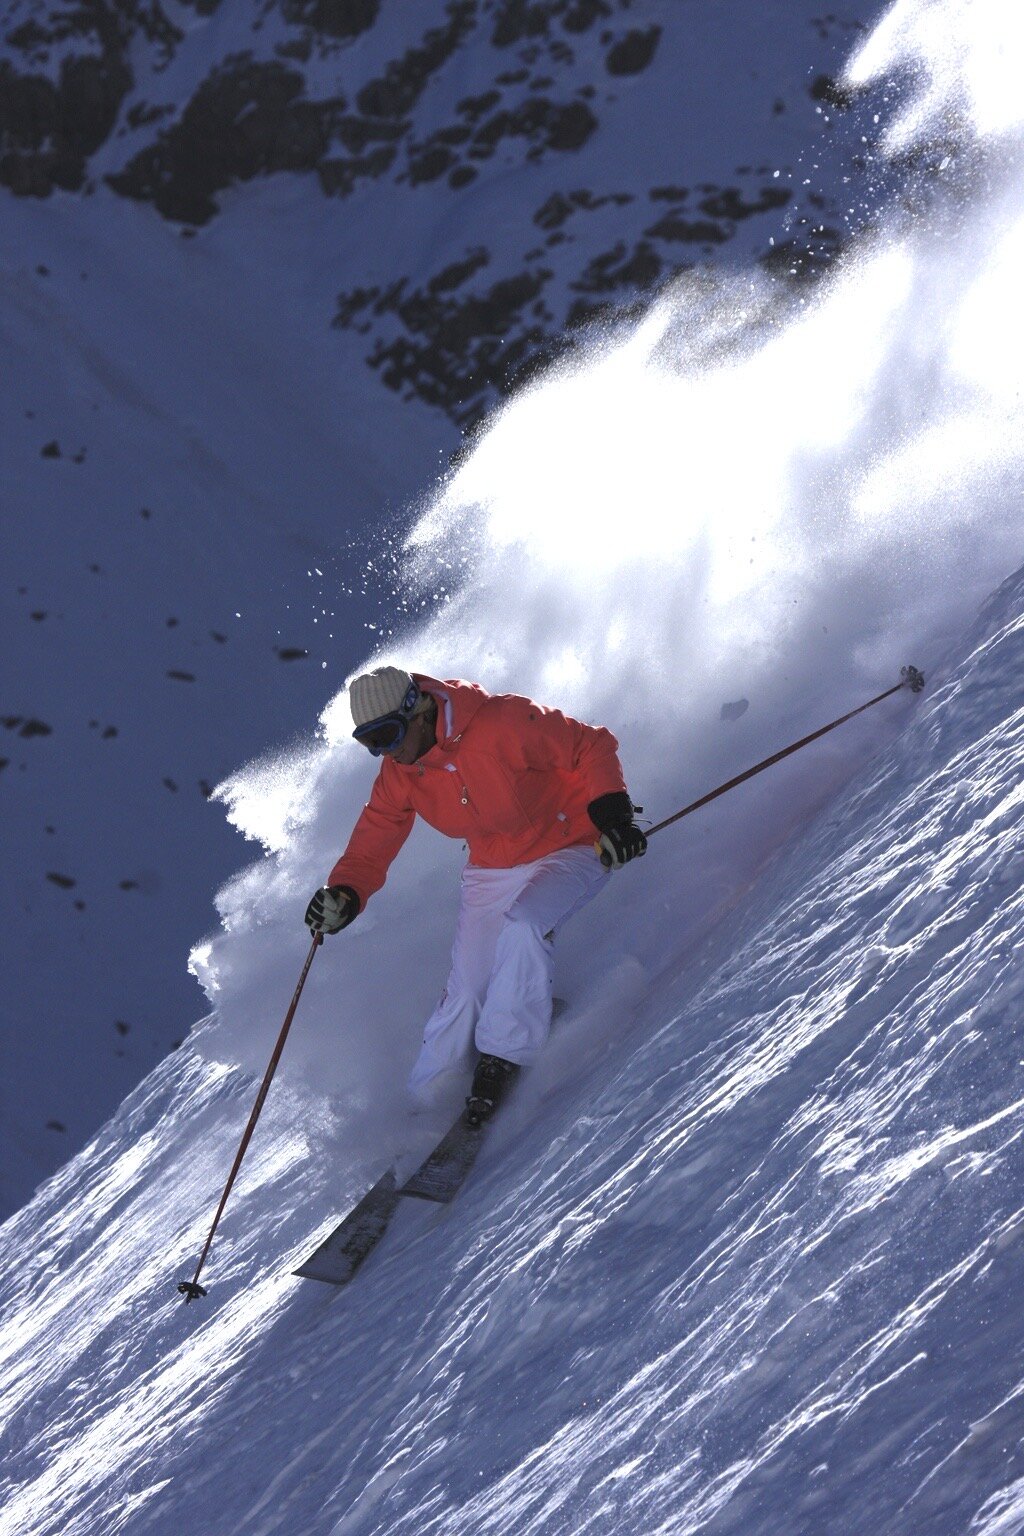 Ripping up the face of Plateau in Portillo 2008